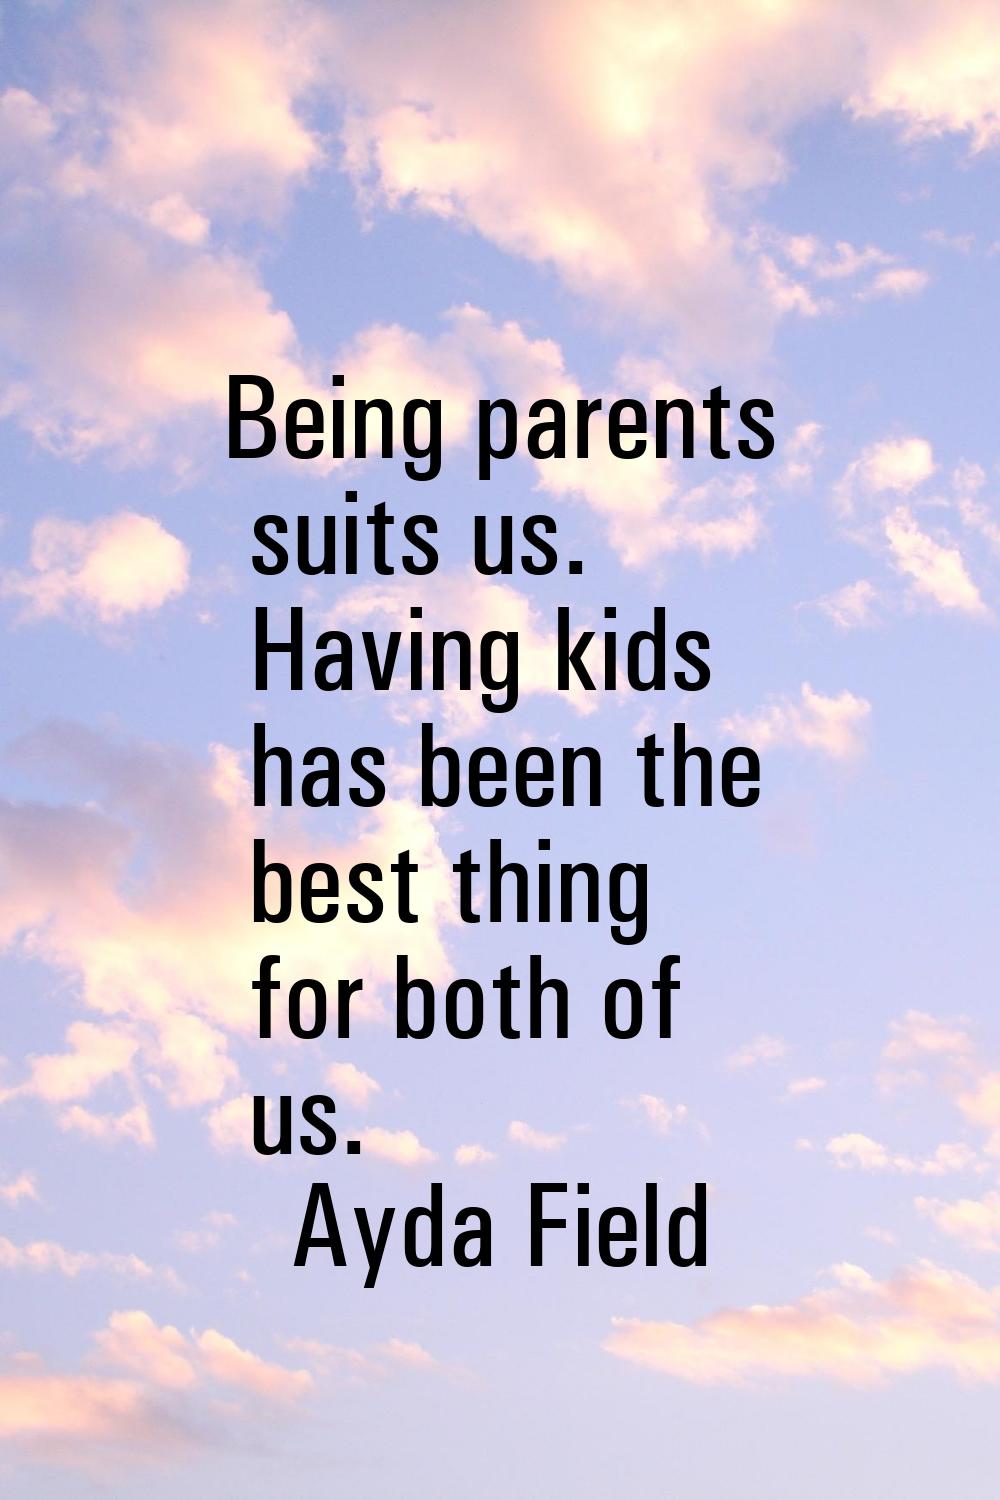 Being parents suits us. Having kids has been the best thing for both of us.